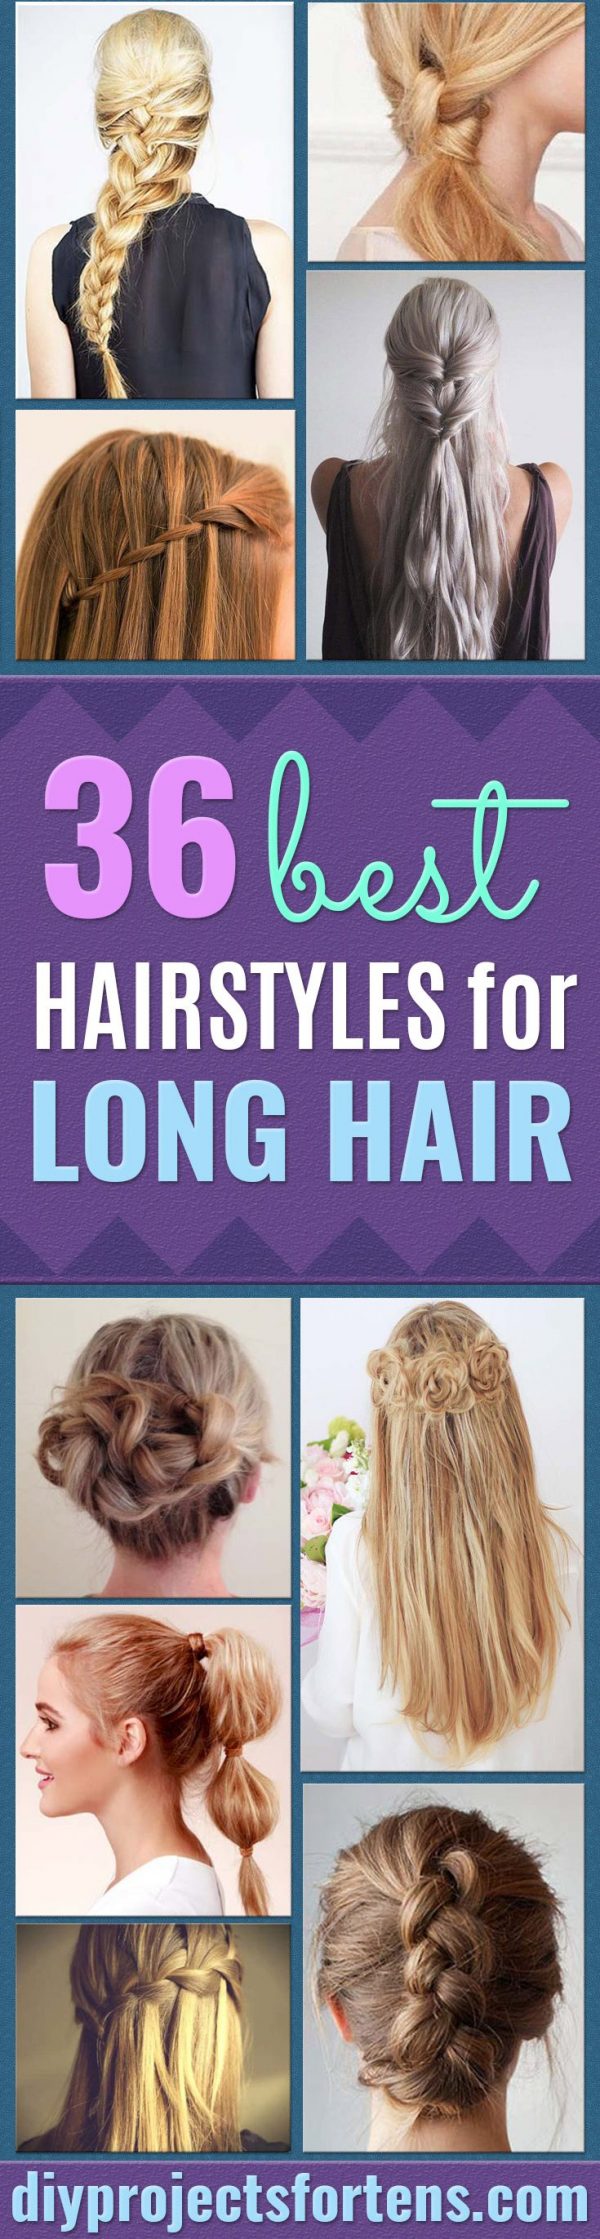 Best Hairstyles for Long Hair - Step by Step Tutorials for Easy Curls, Updo, Half Up, Braids and Lazy Girl Looks. Prom Ideas, Special Occasion Hair and Braiding Instructions for Teens, Teenagers and Adults, Women and Girls